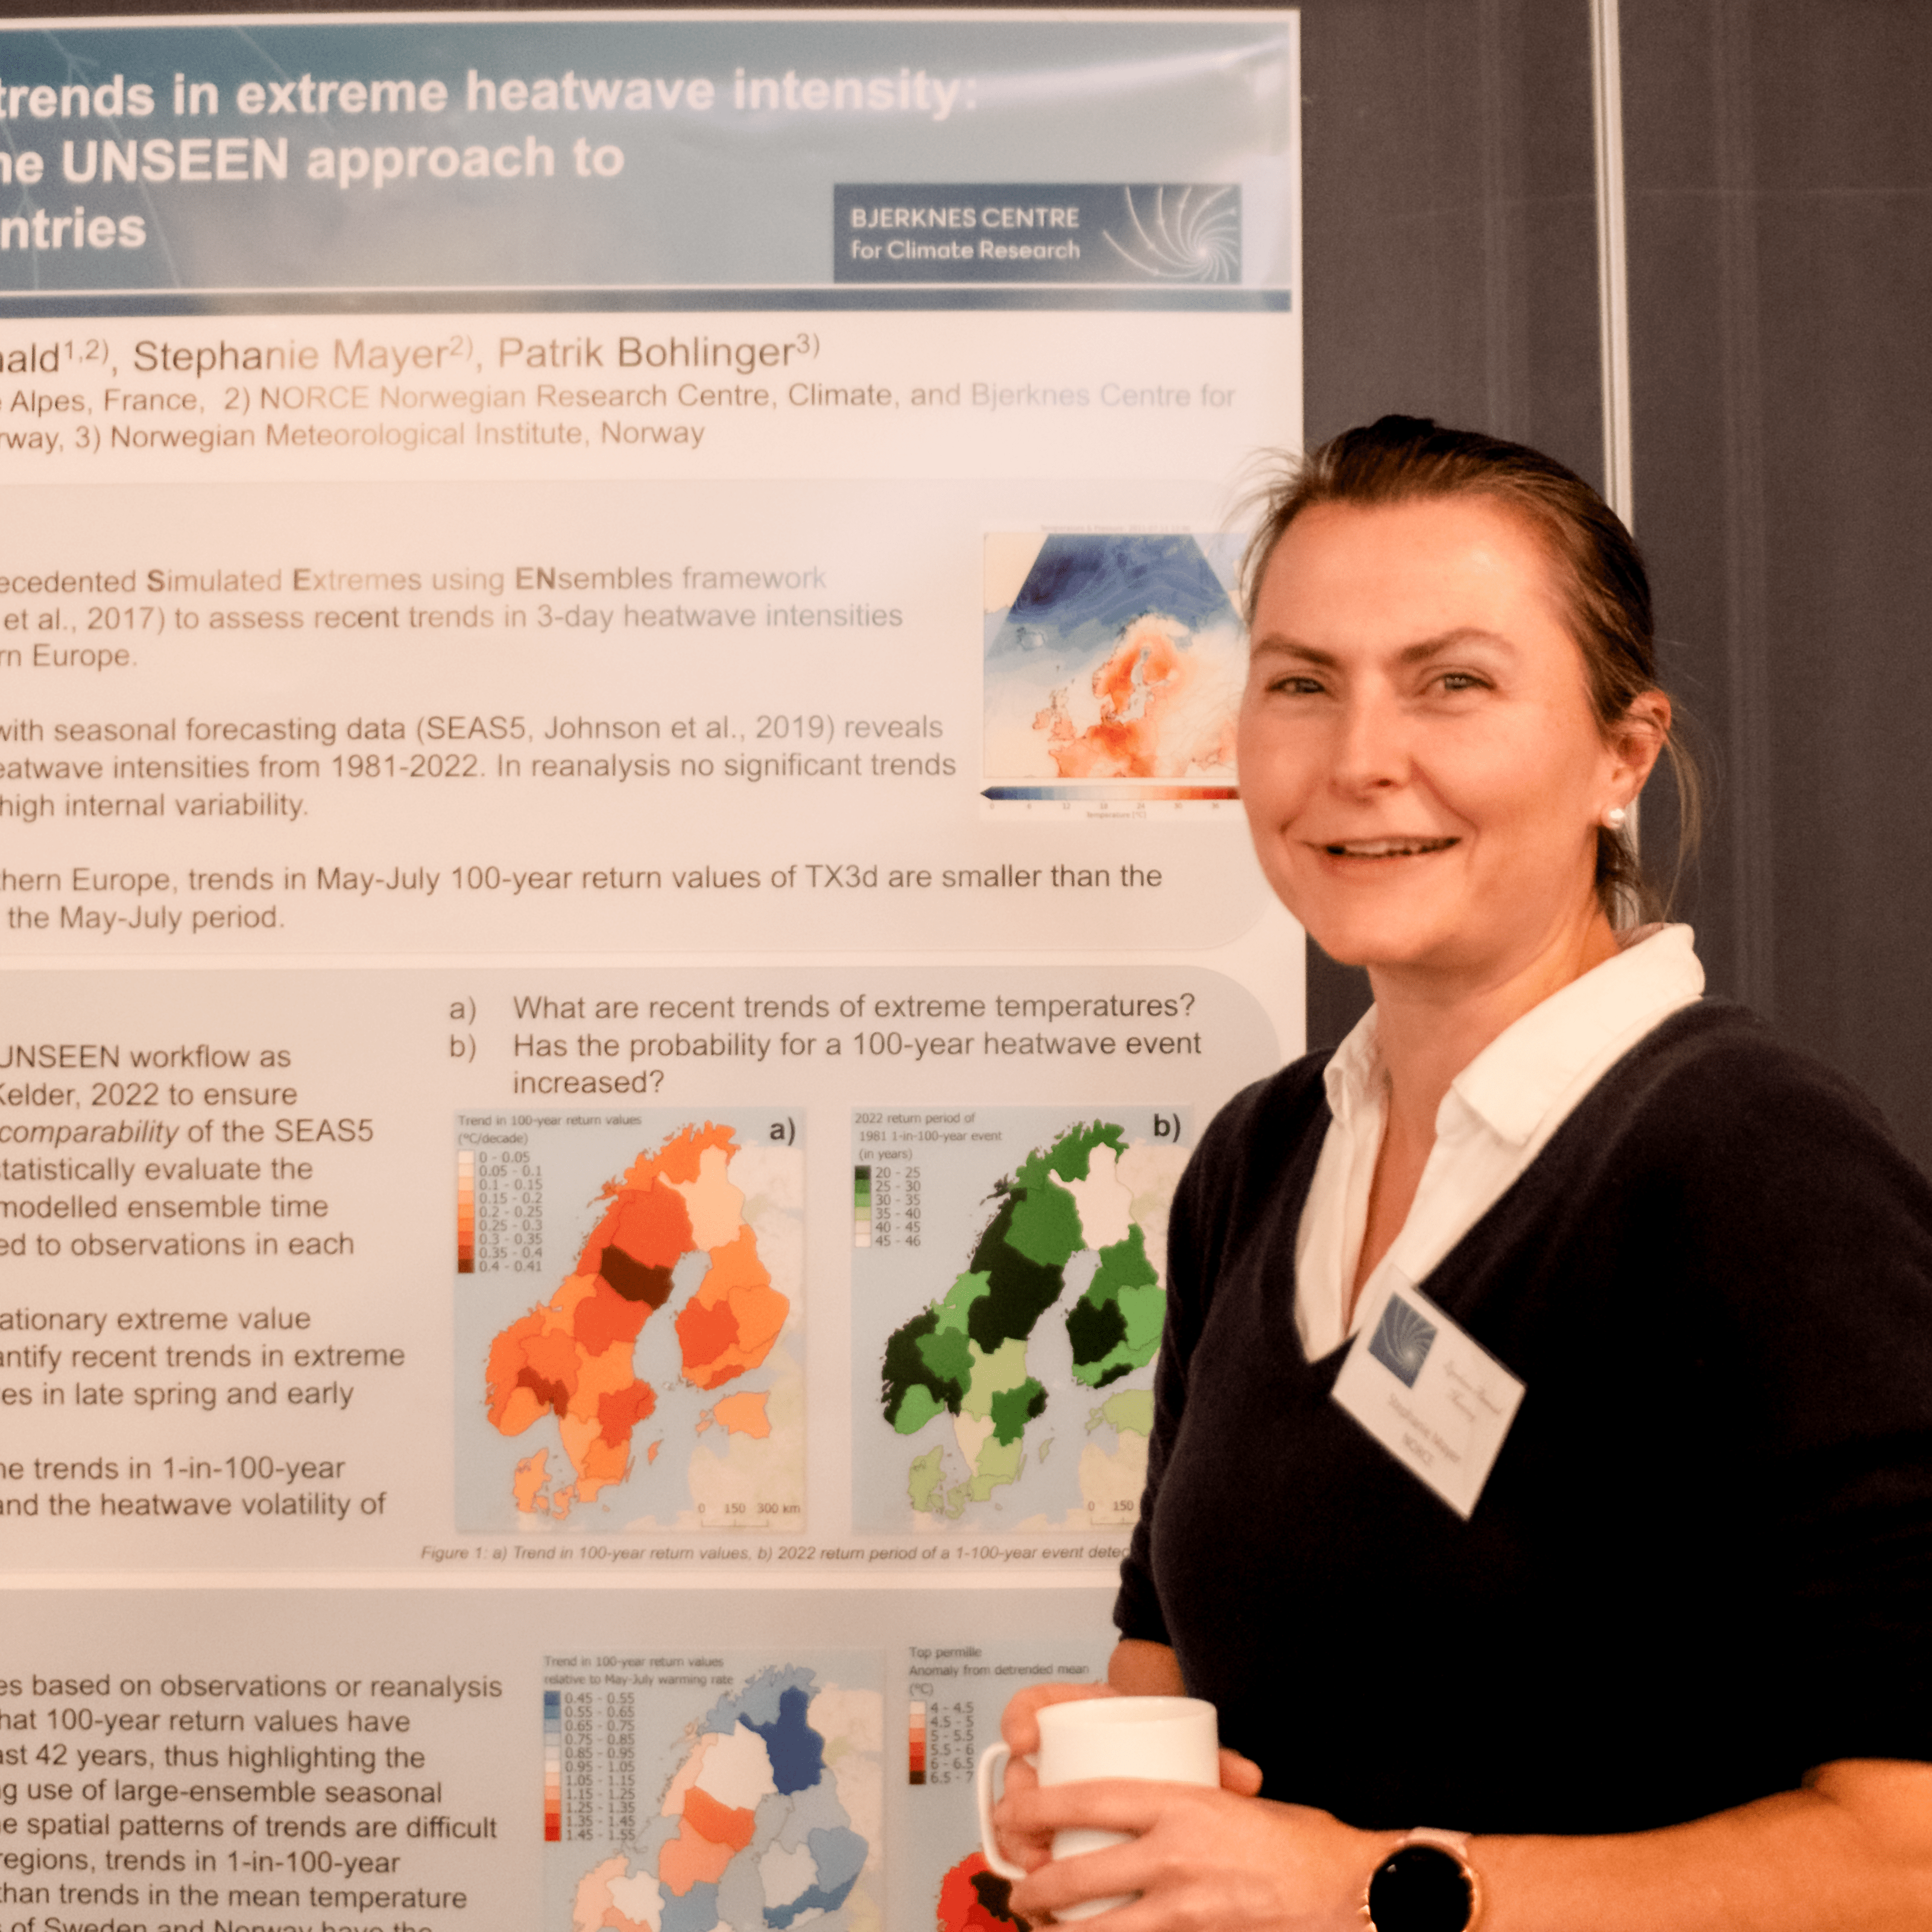 Stephanie Meyer, researcher with NORCE and Bjerknes Center, standing in front of a poster on Extreme Heatwave Intensity.